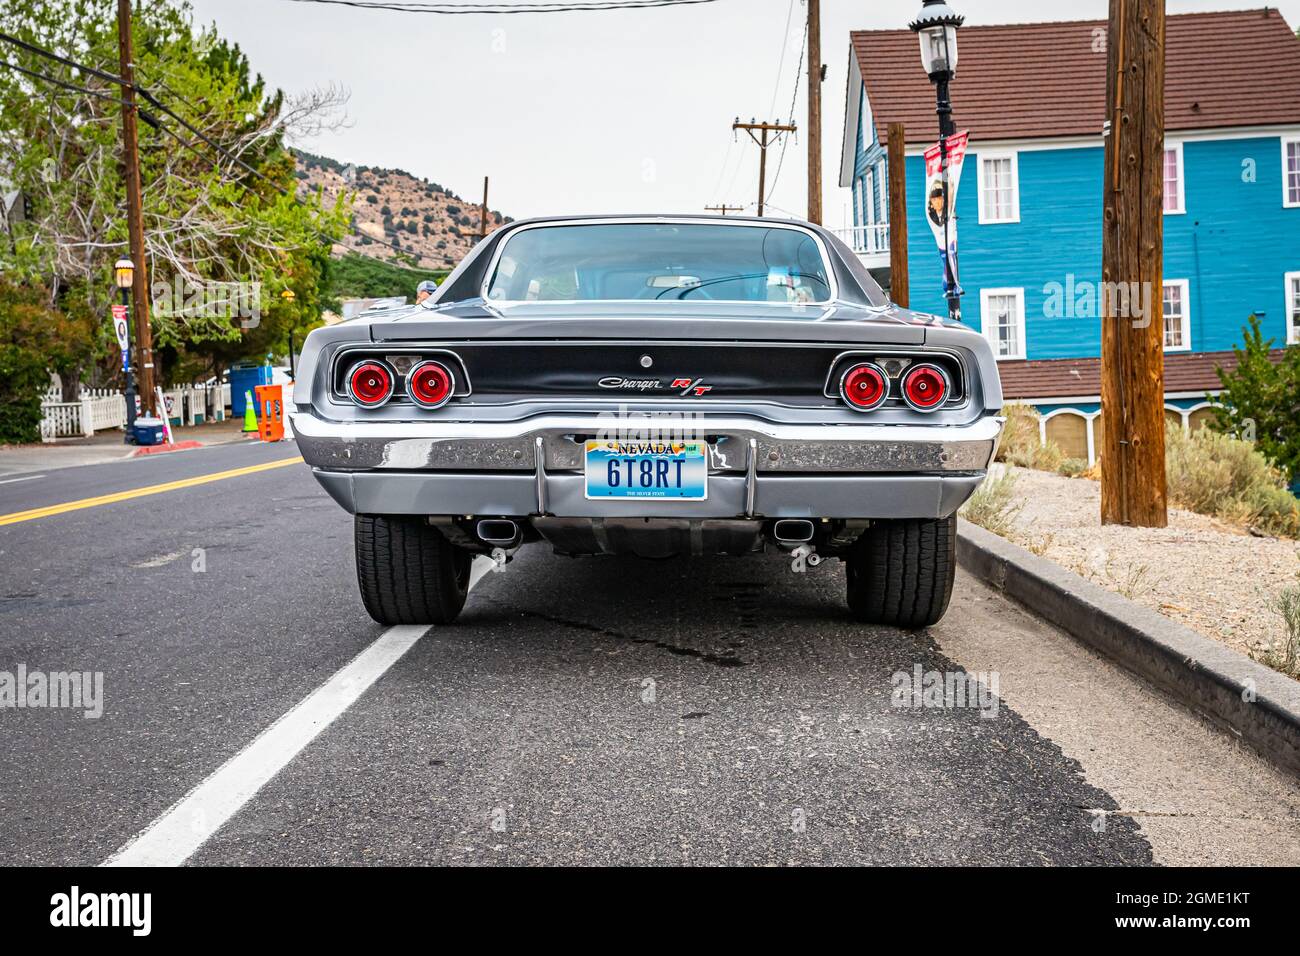 Virginia City, NV - July 31, 2021: 1968 Dodge Charger R/T hardtop coupe at a local car show. Stock Photo